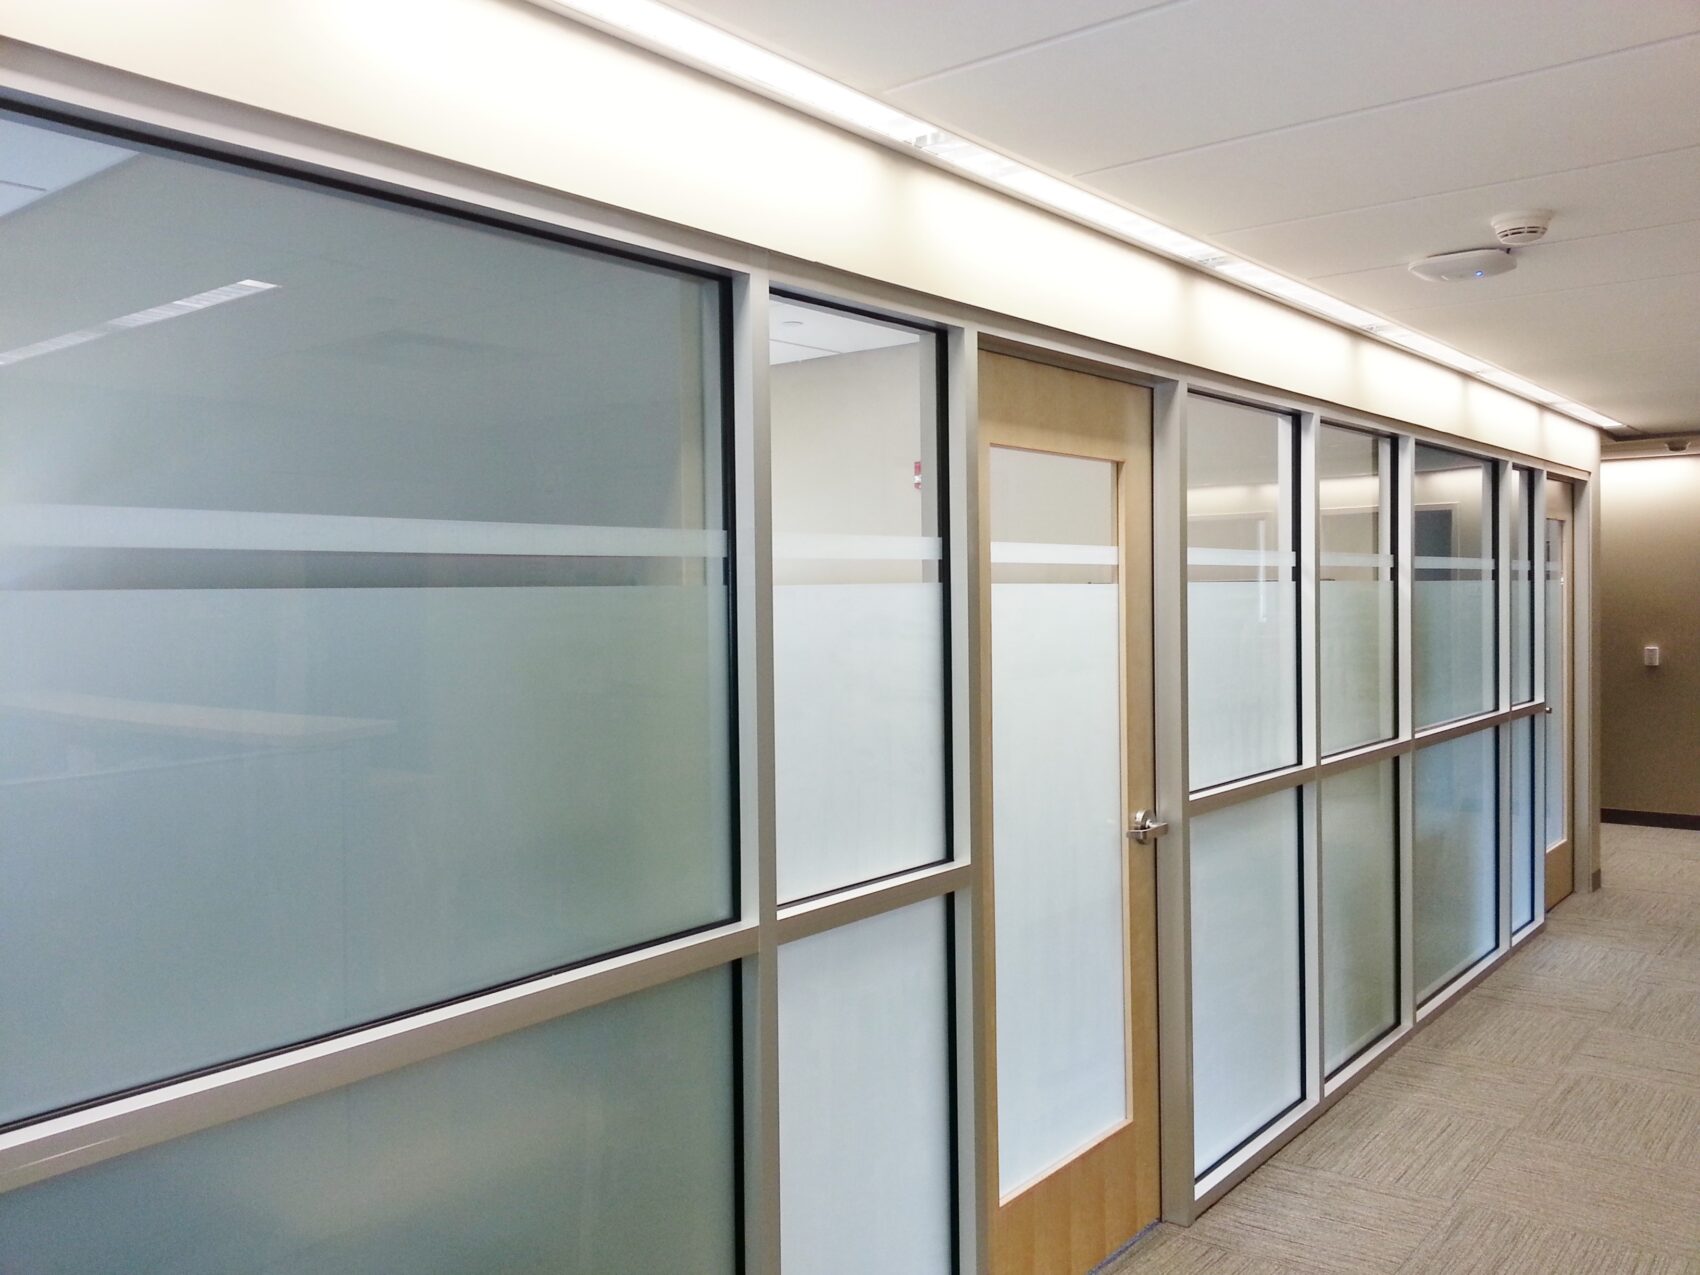 Fasara Decorative Window Films installed at an office building in Allentown PA by Sun Control Plus